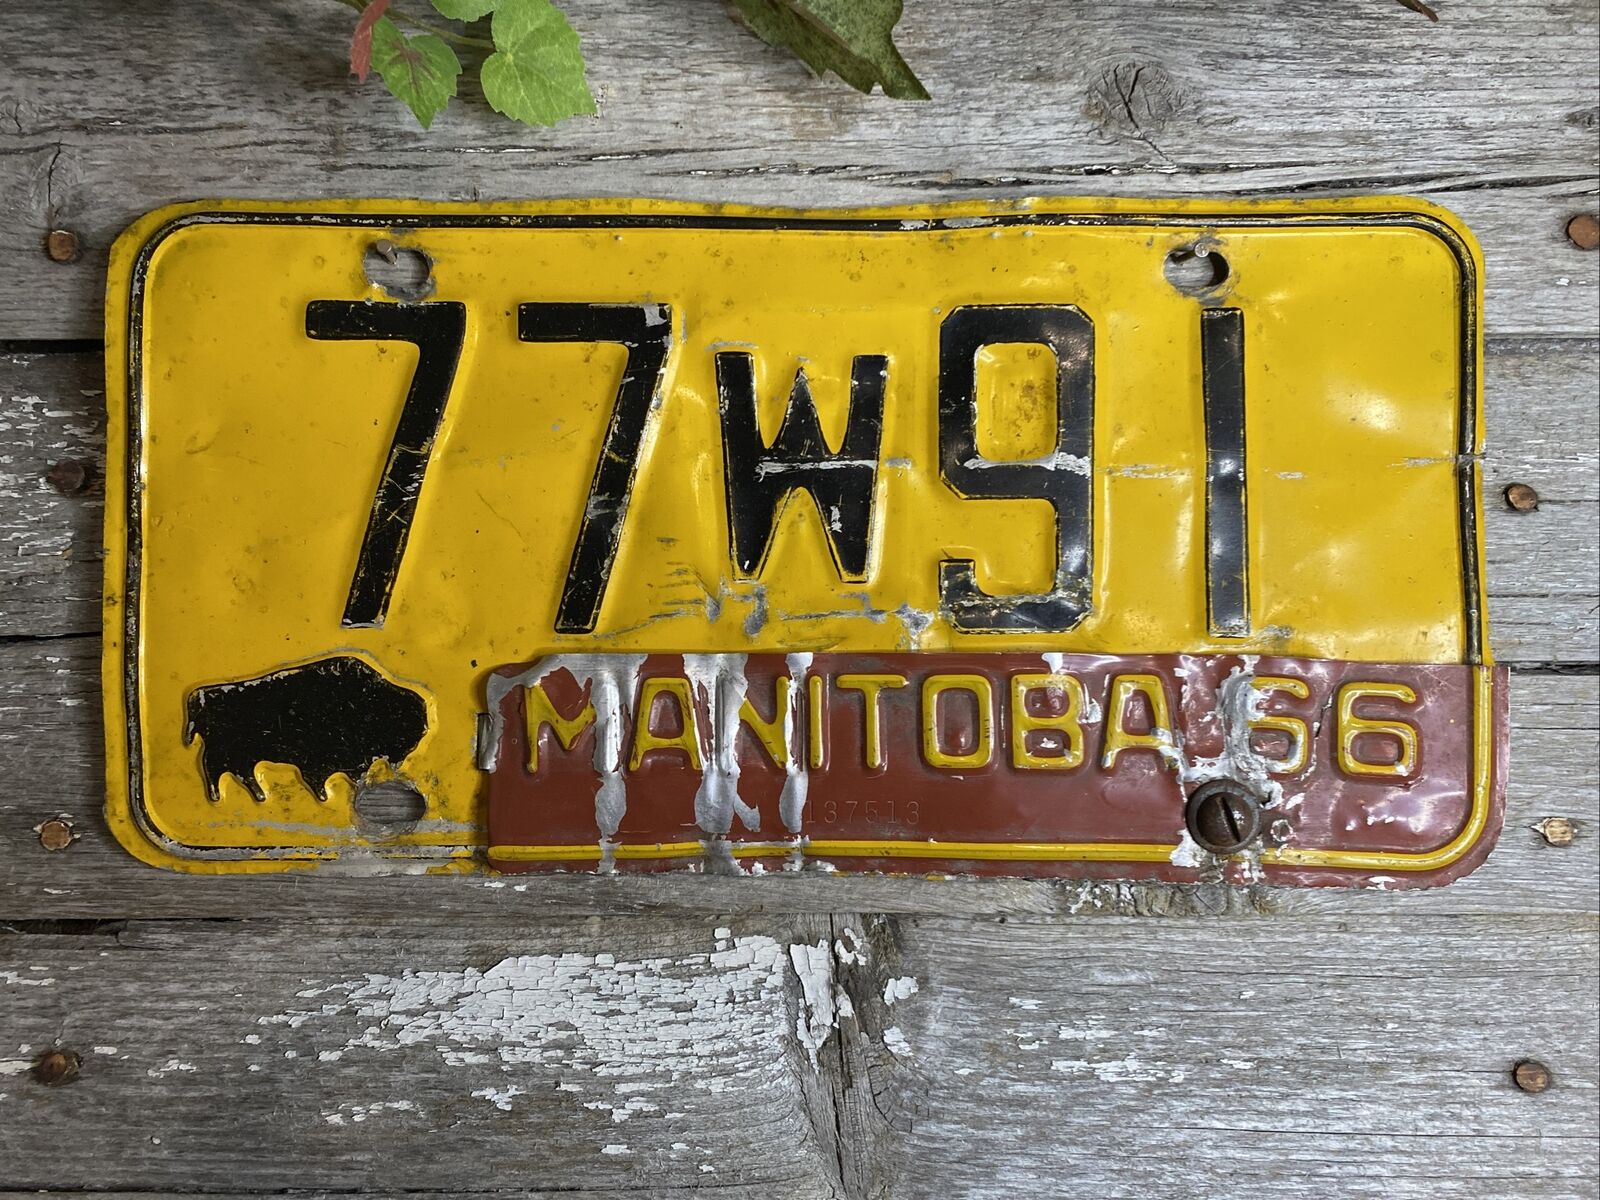 Vintage Manitoba Canada License Plate 77W91 with 1966 Tab